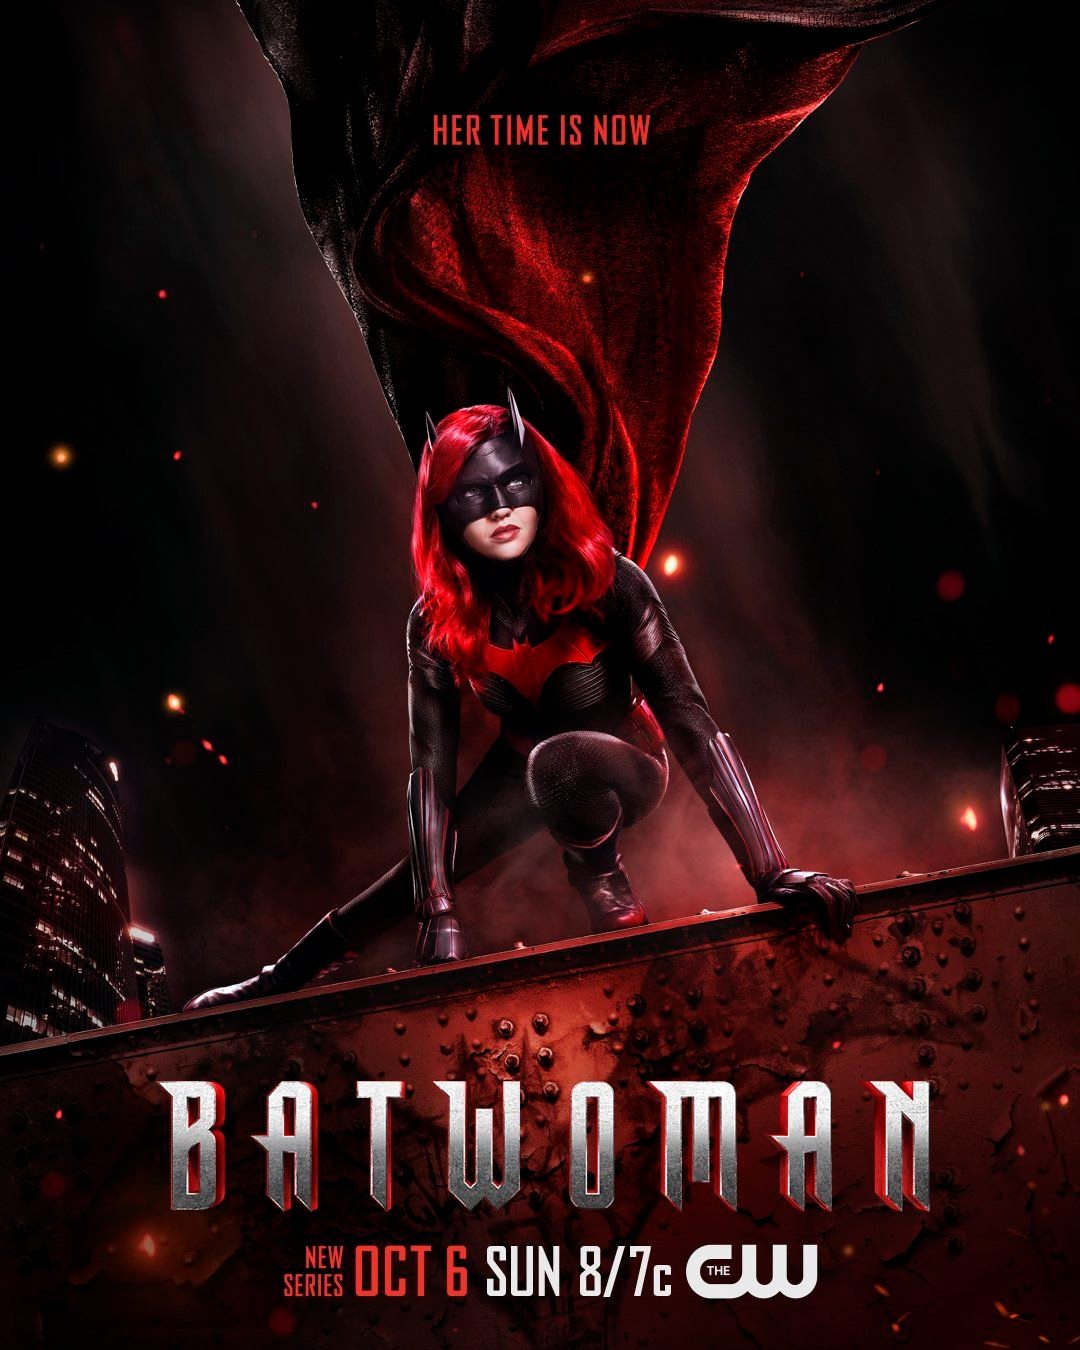 Watch New Trailer And Posters For The Cw S Batwoman Series Following The Nerd Following The